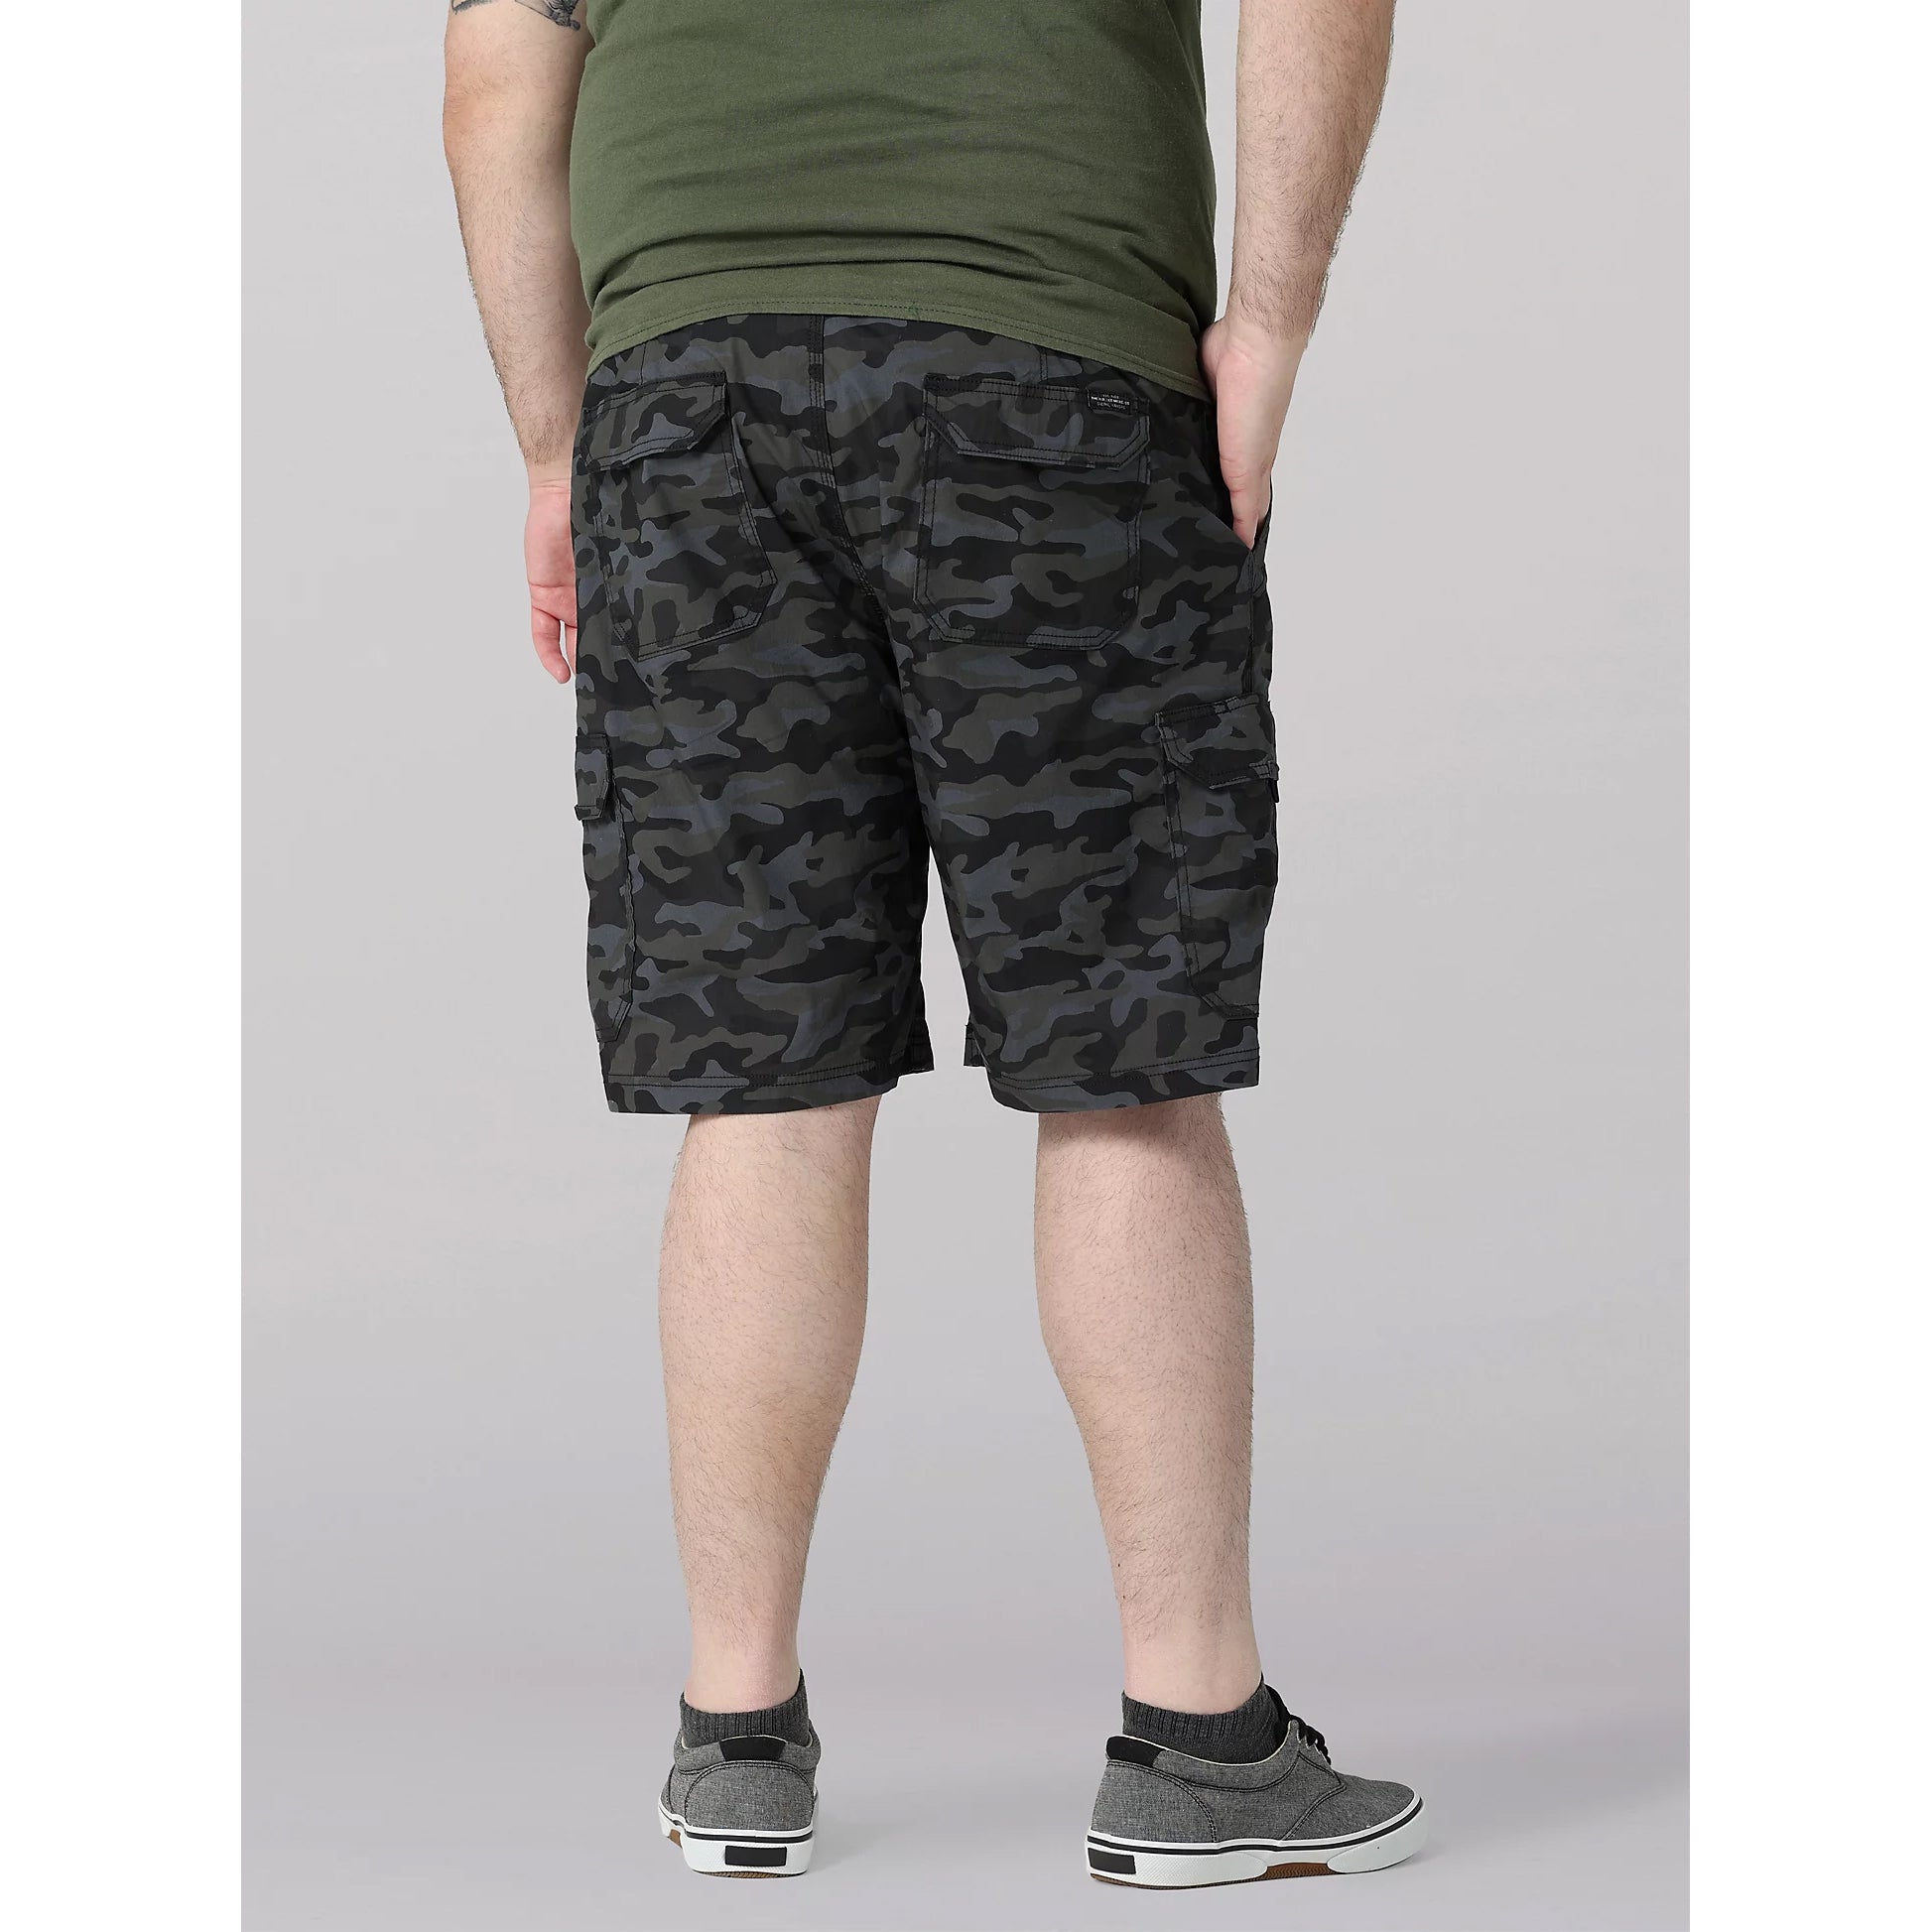 Lee 2314757 Extreme Motion Crossroad Cargo Relaxed Shorts in Black Camo Back